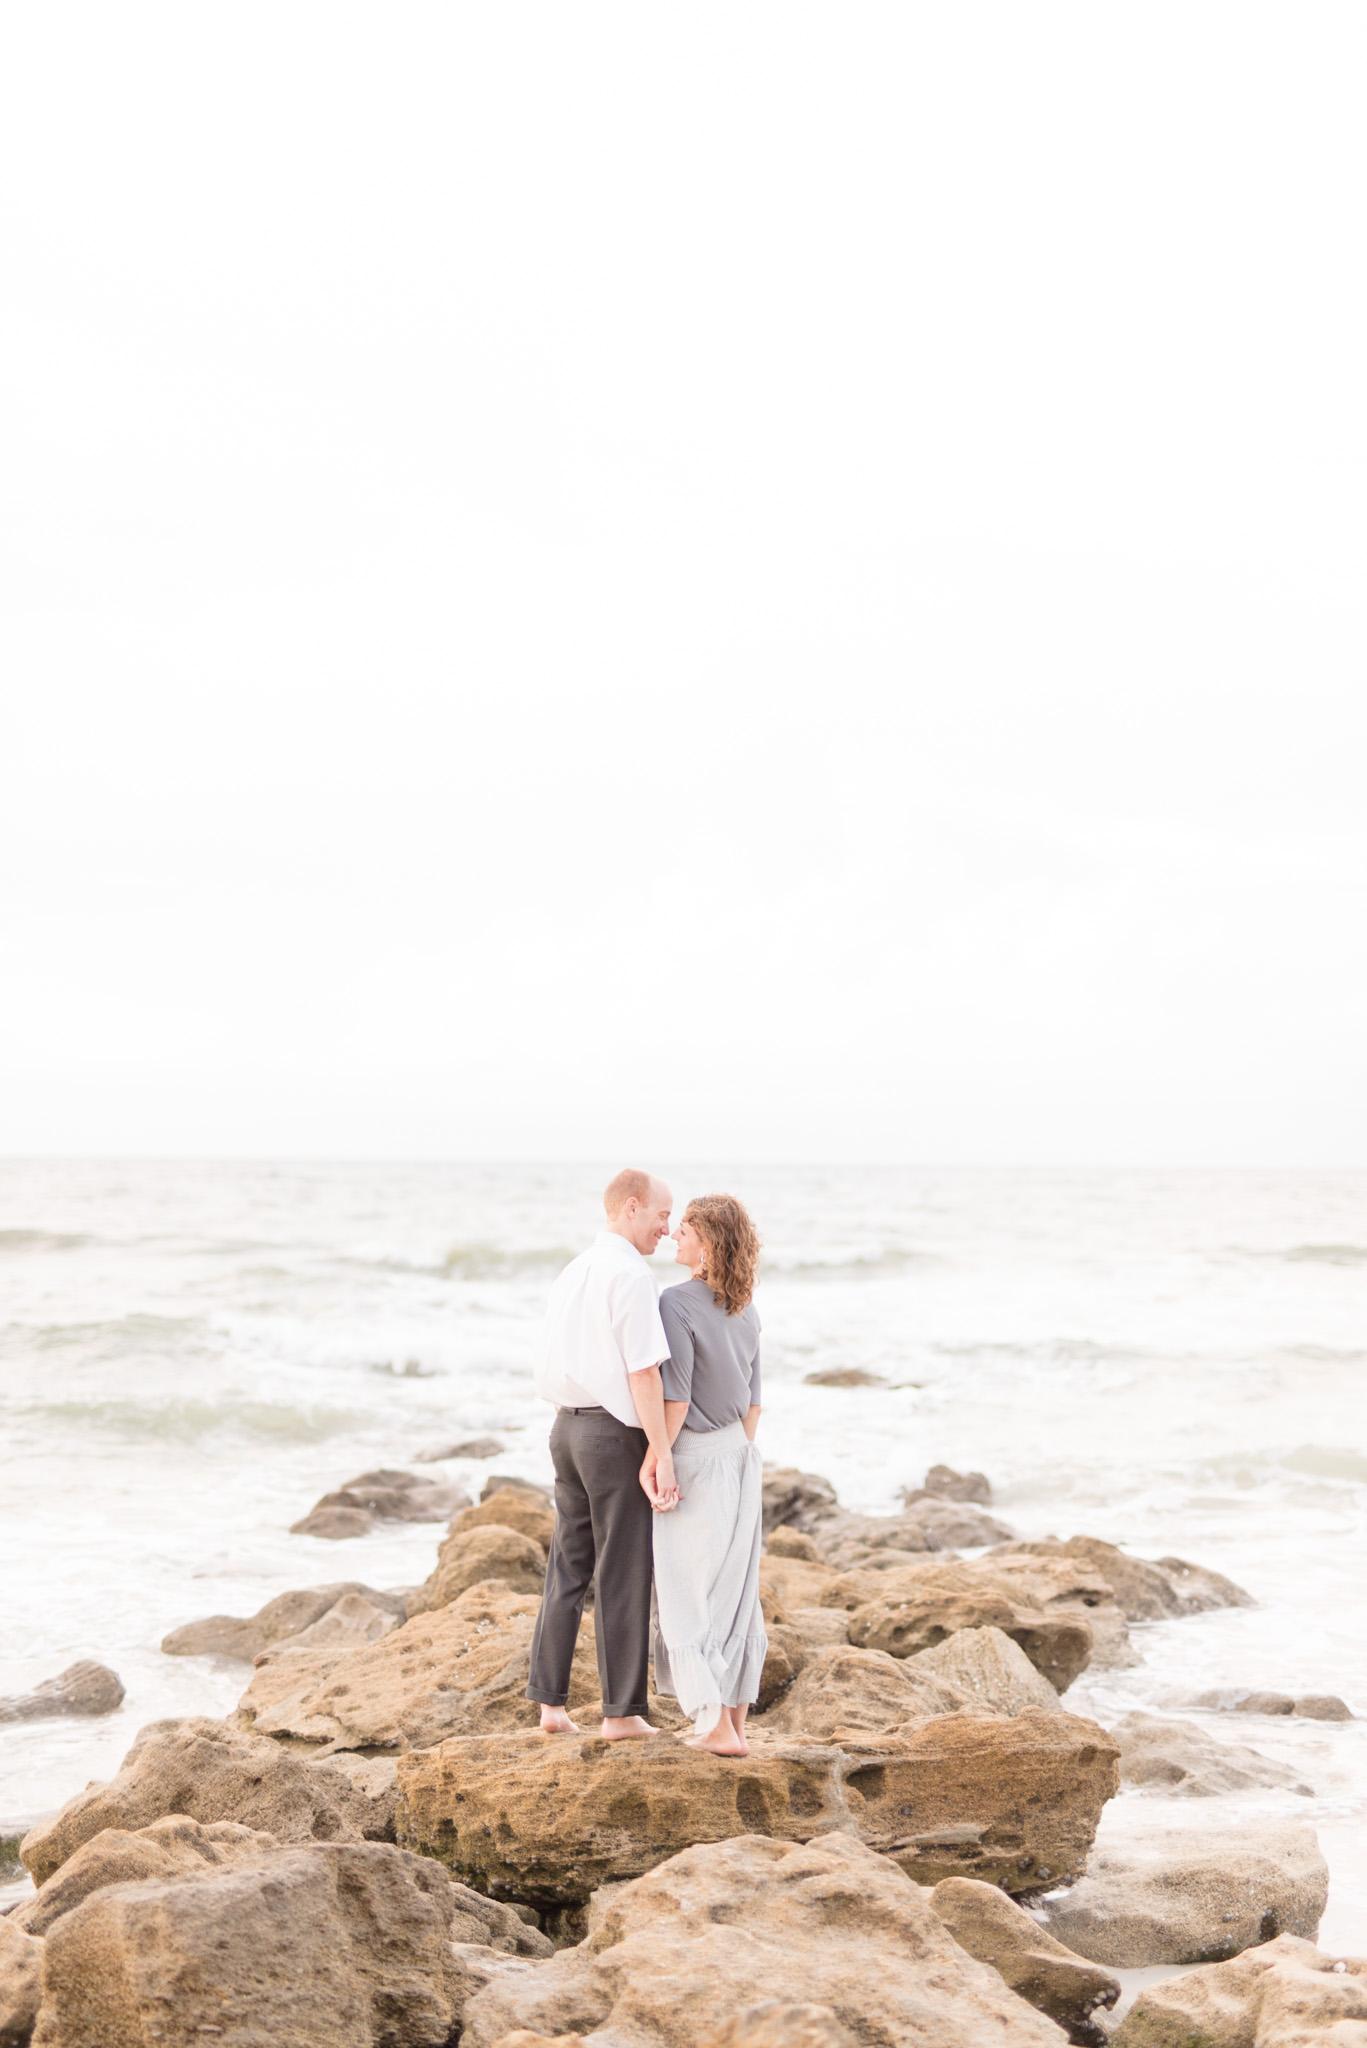 Couple stands on beach rocks.